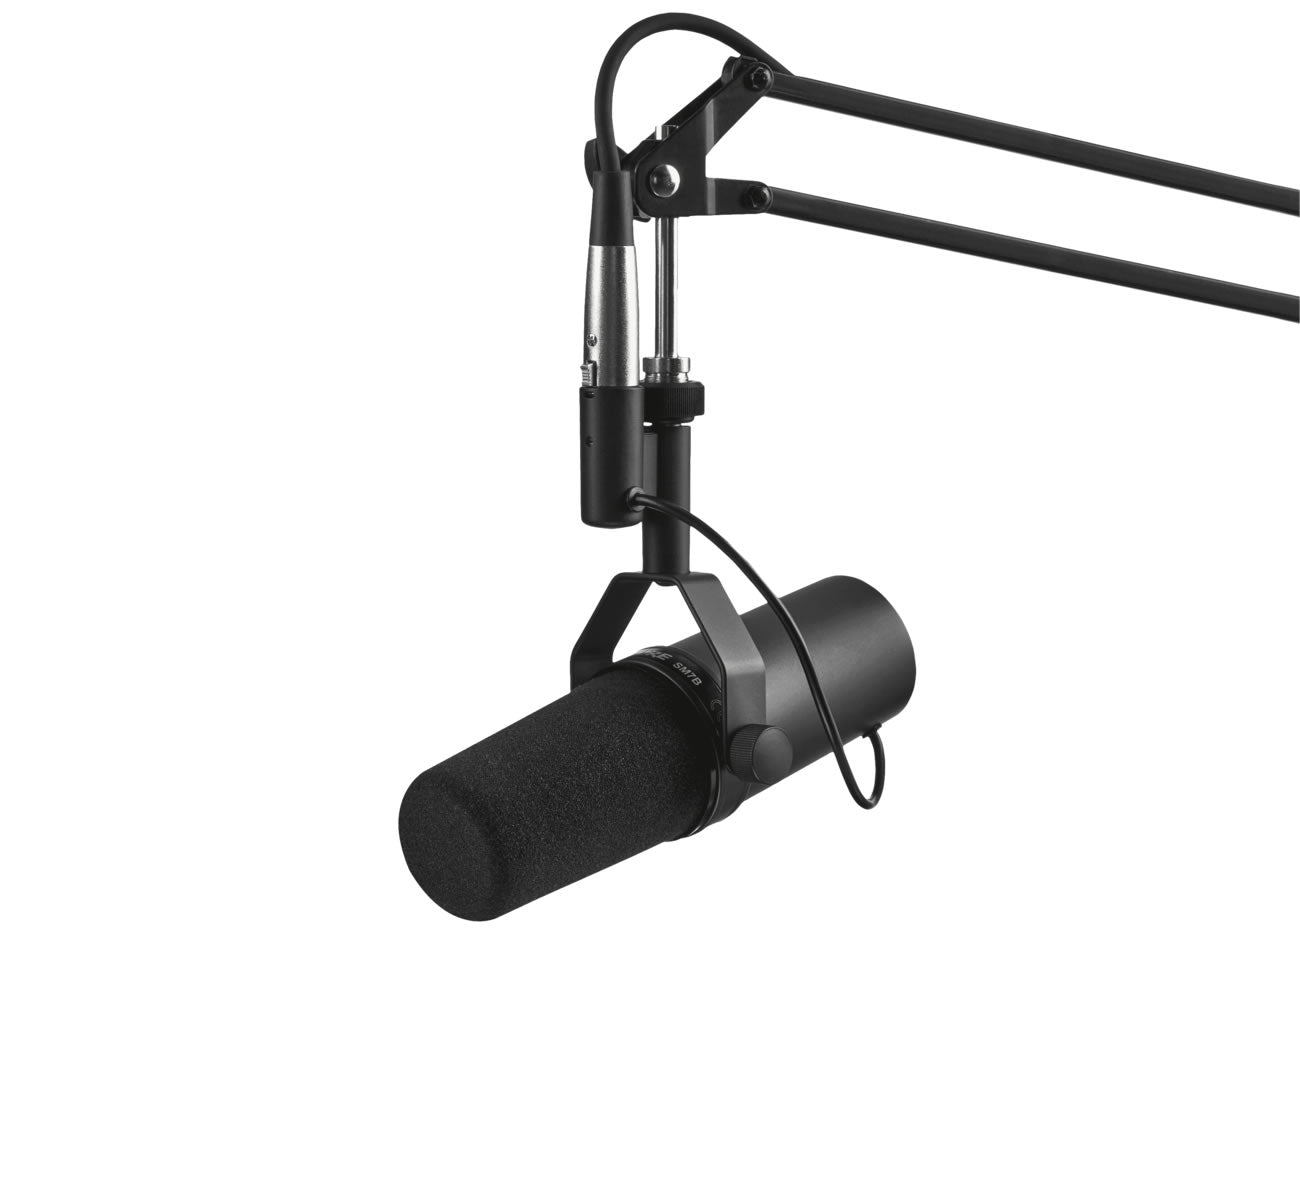  Shure SM7B Vocal Dynamic XLR Microphone for Broadcast